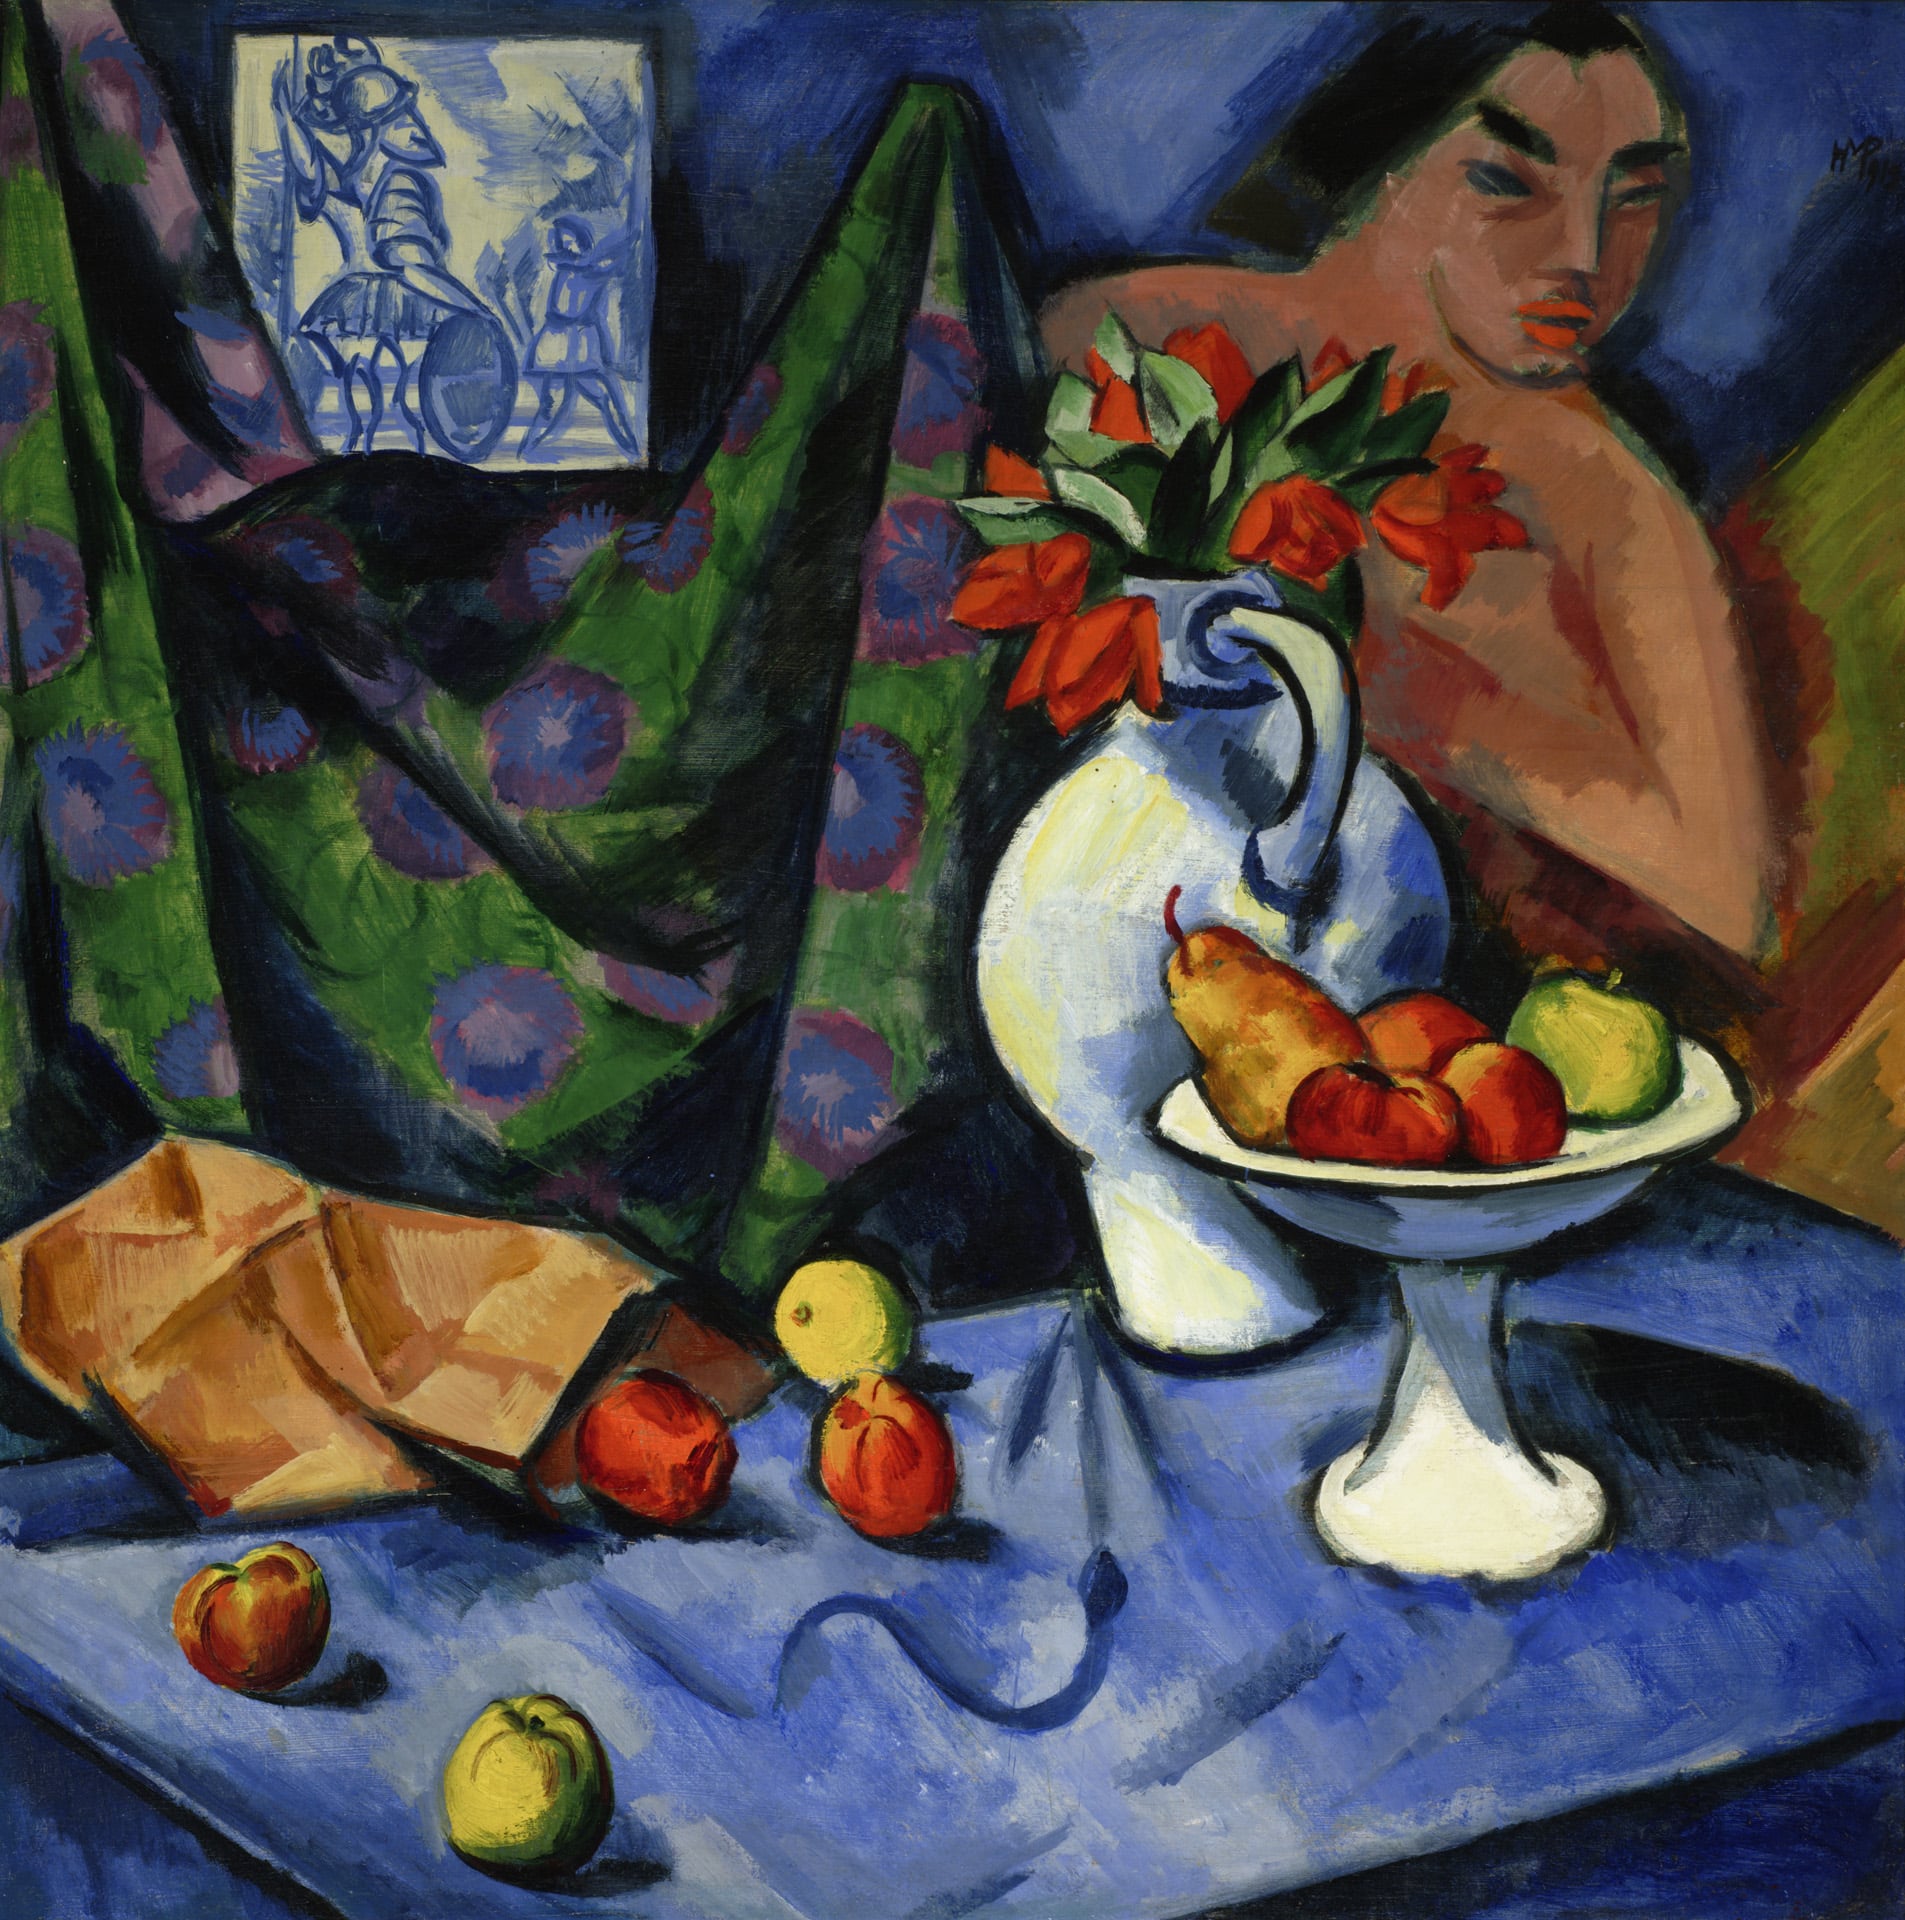 a painting of a woman with a table of apples and a vase of flowers